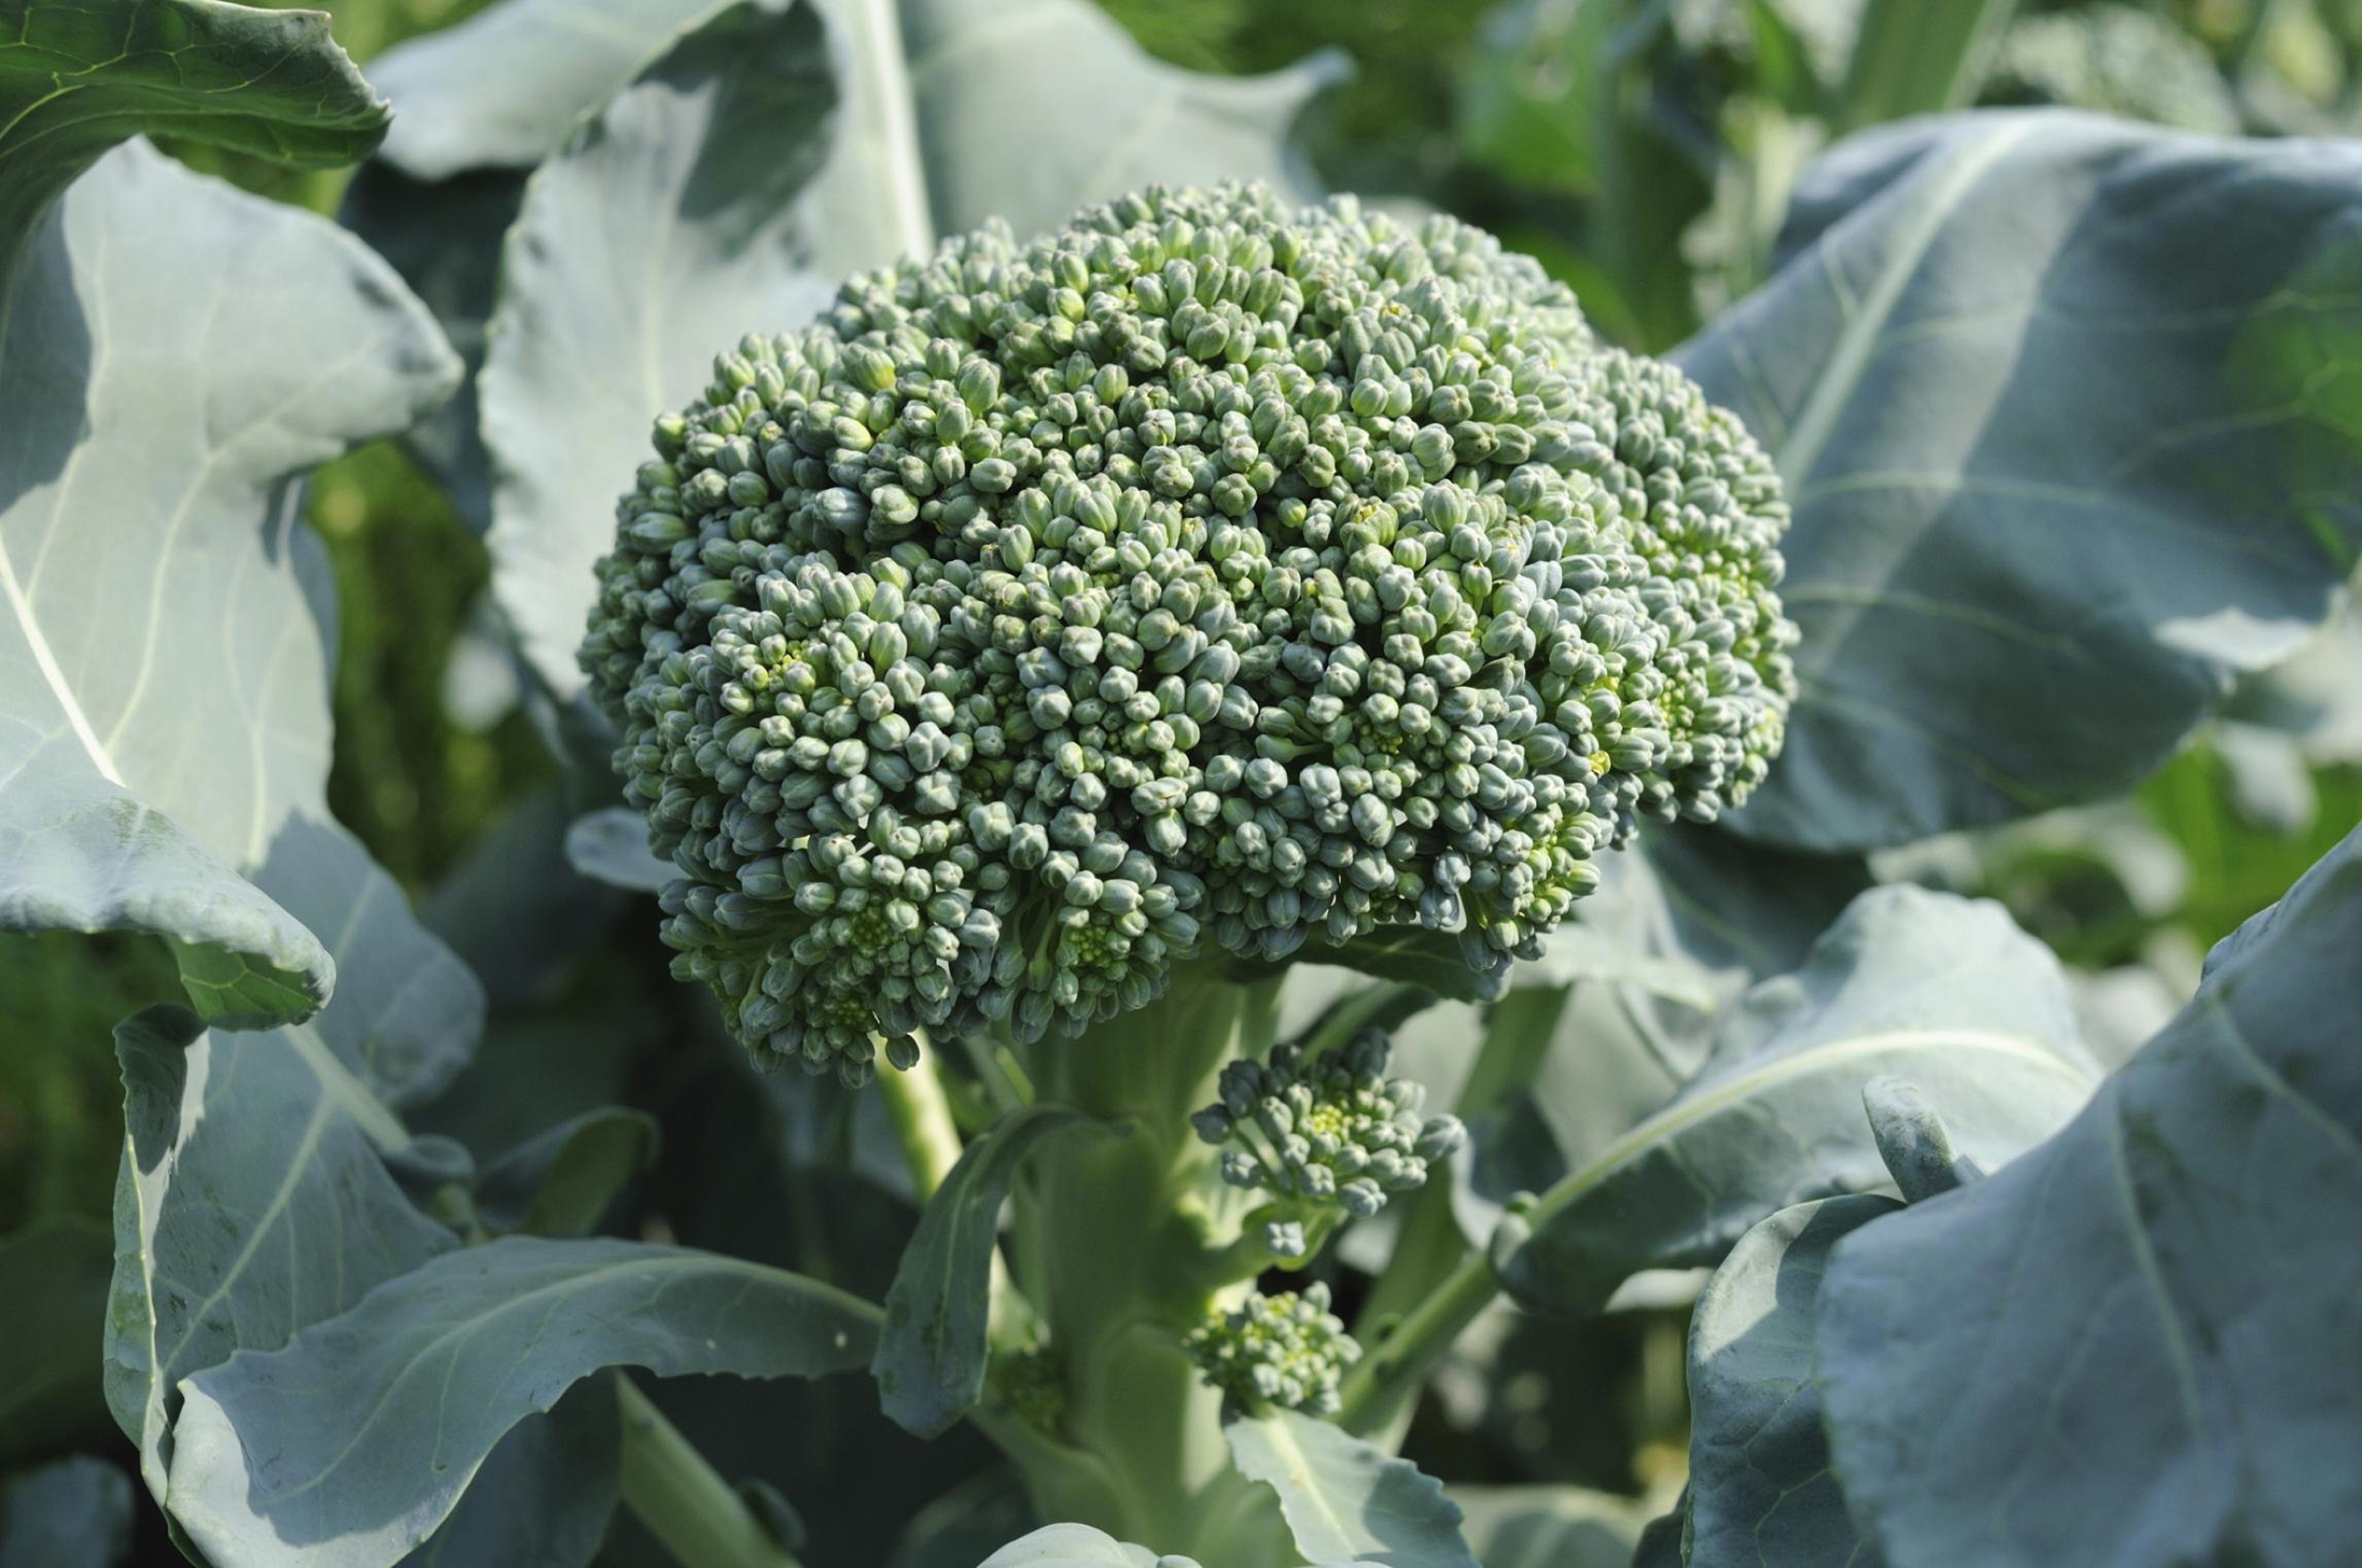 Broccoli is rich in nutrients (Thinkstock/PA)